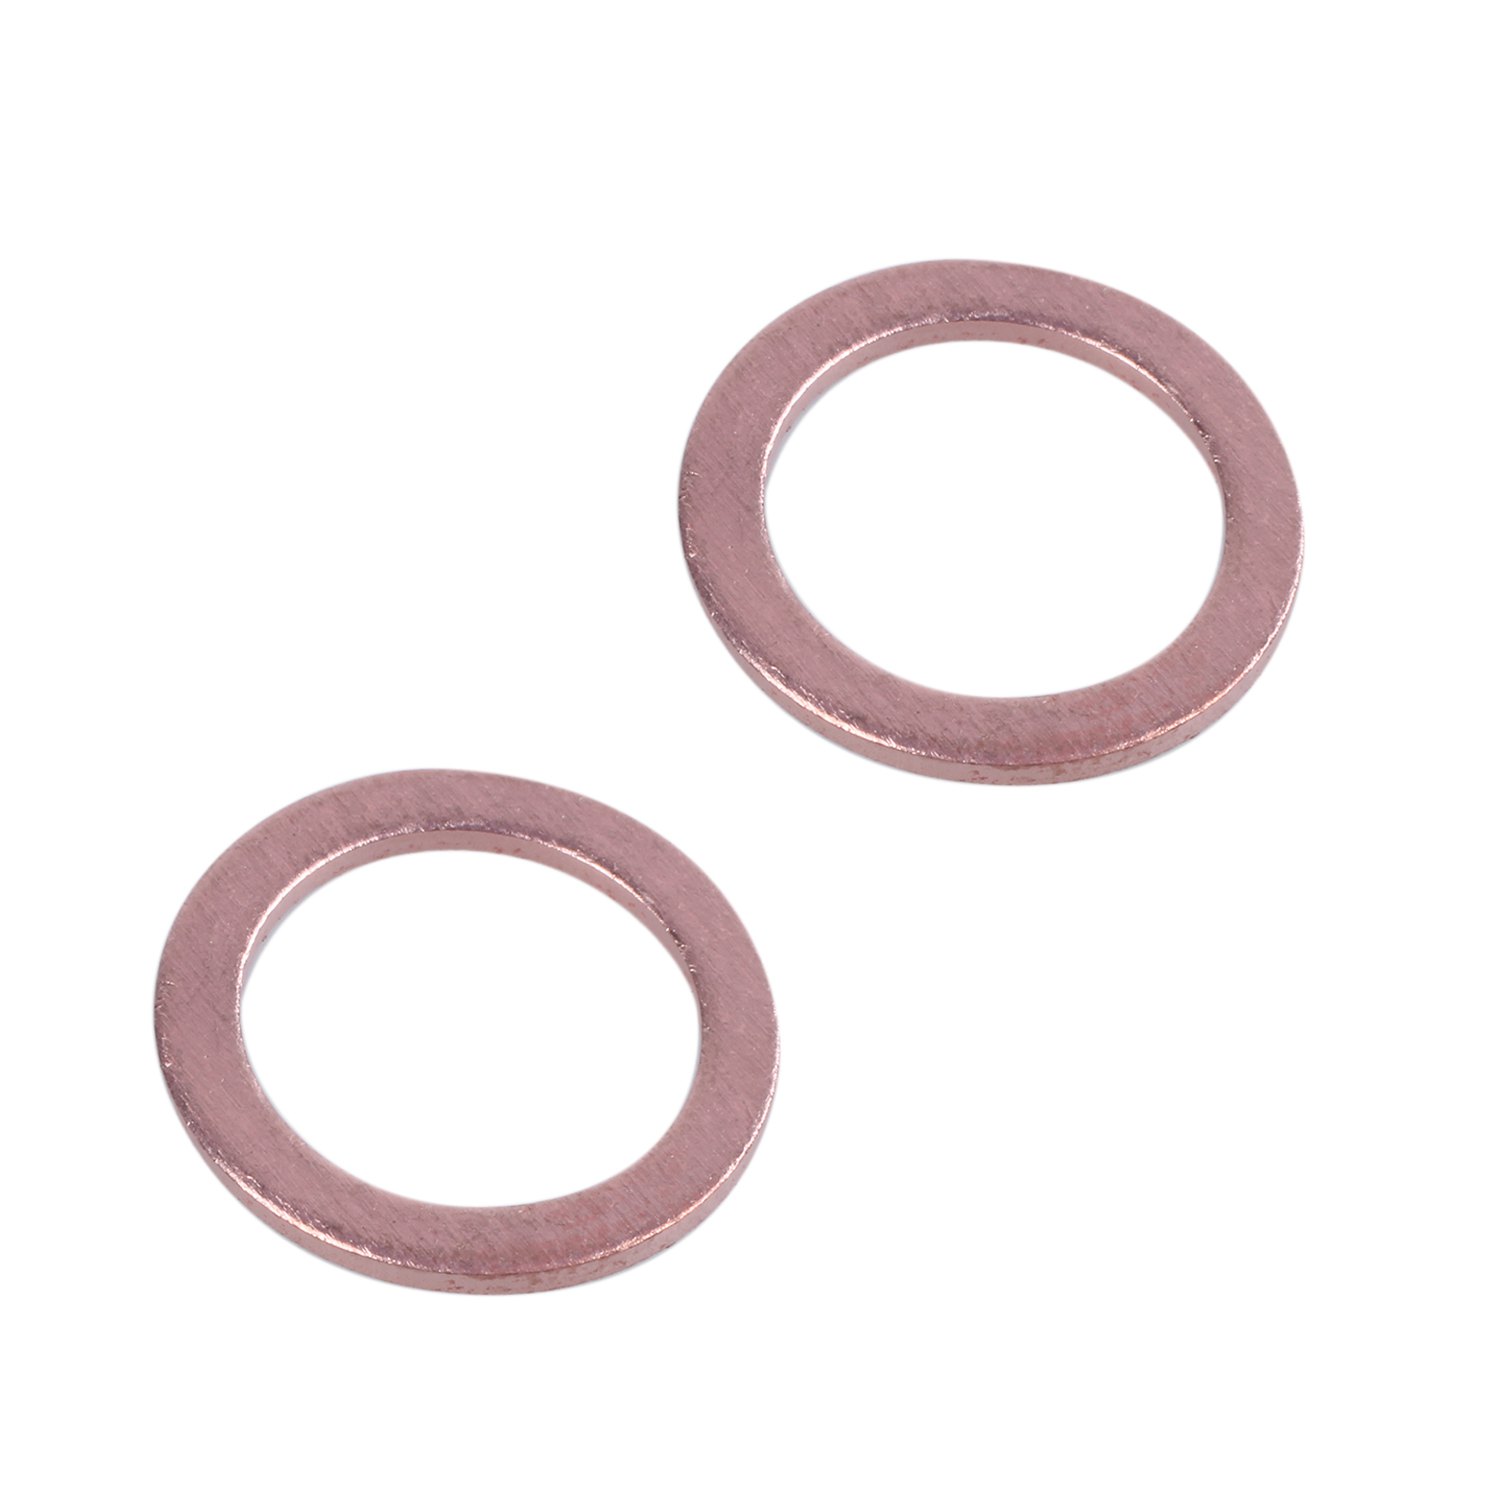 20 pcs 10mm x 14mm x 1mm copper washer seal spacer seal